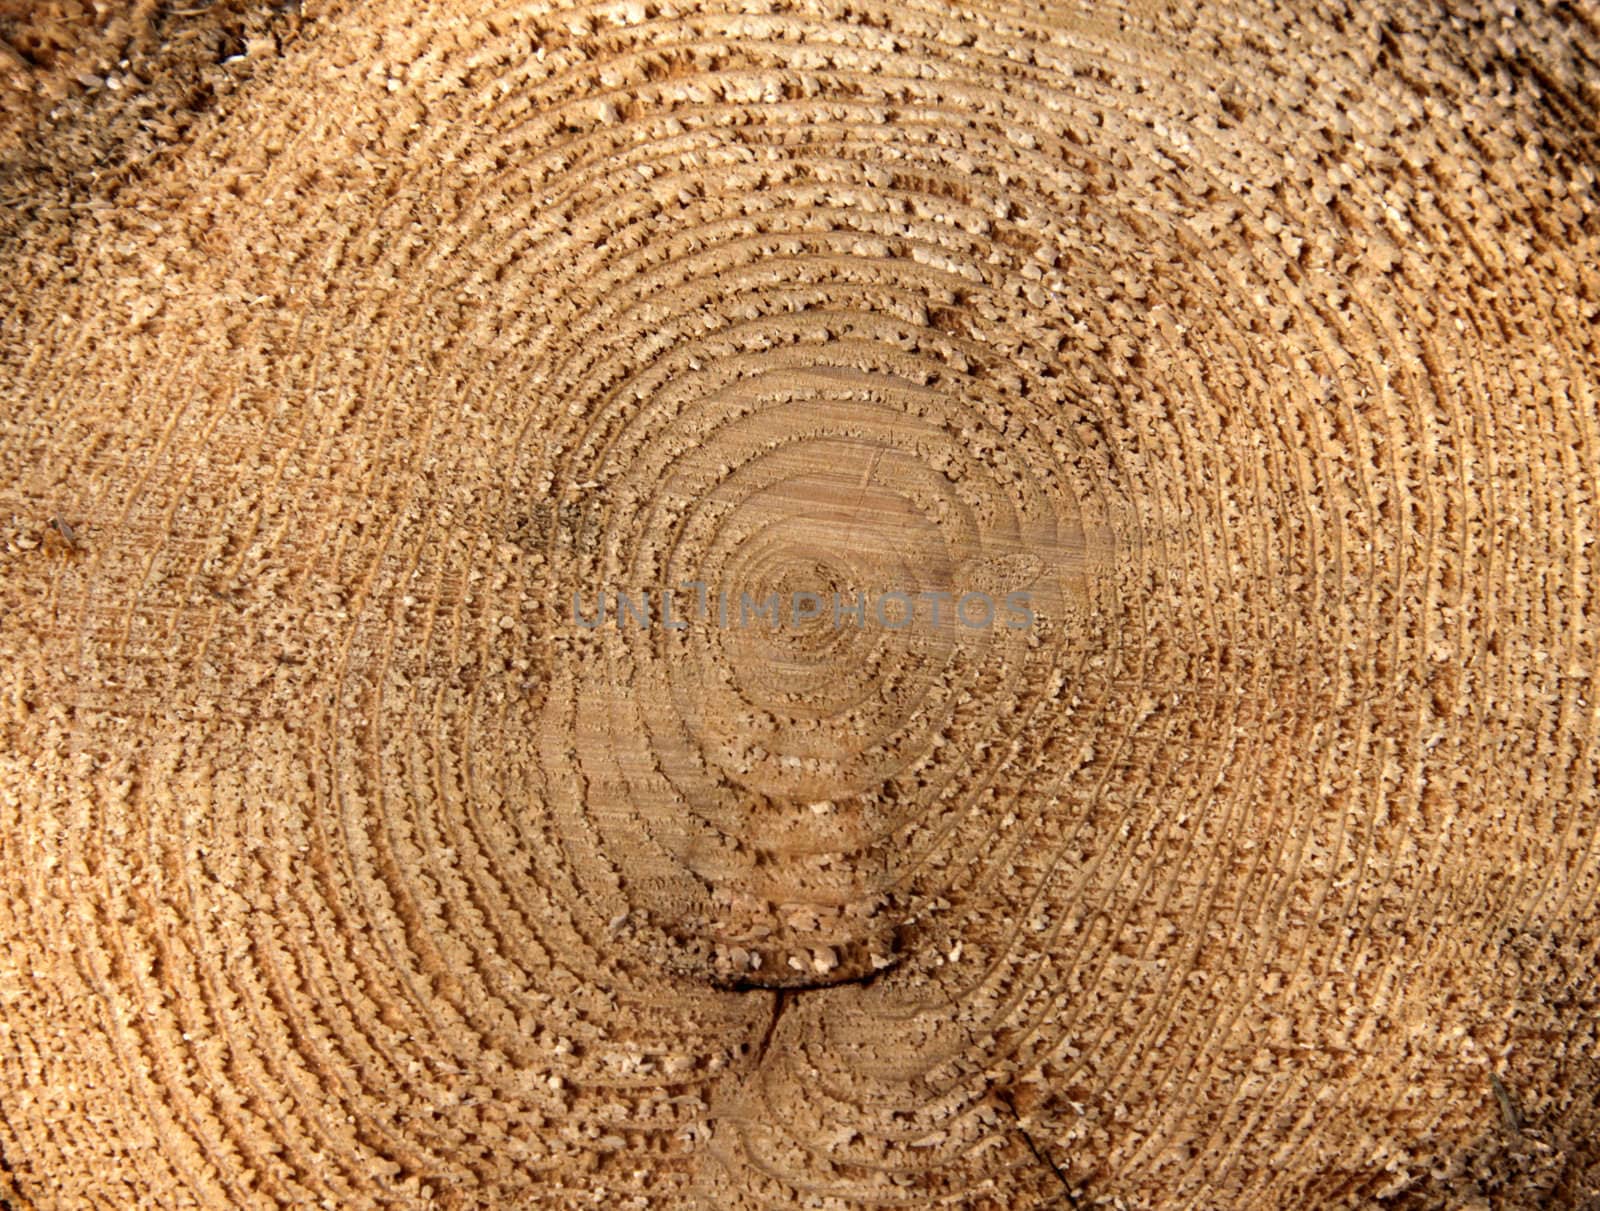 A close-up of the cross section of a tree, displaying annual rings.
